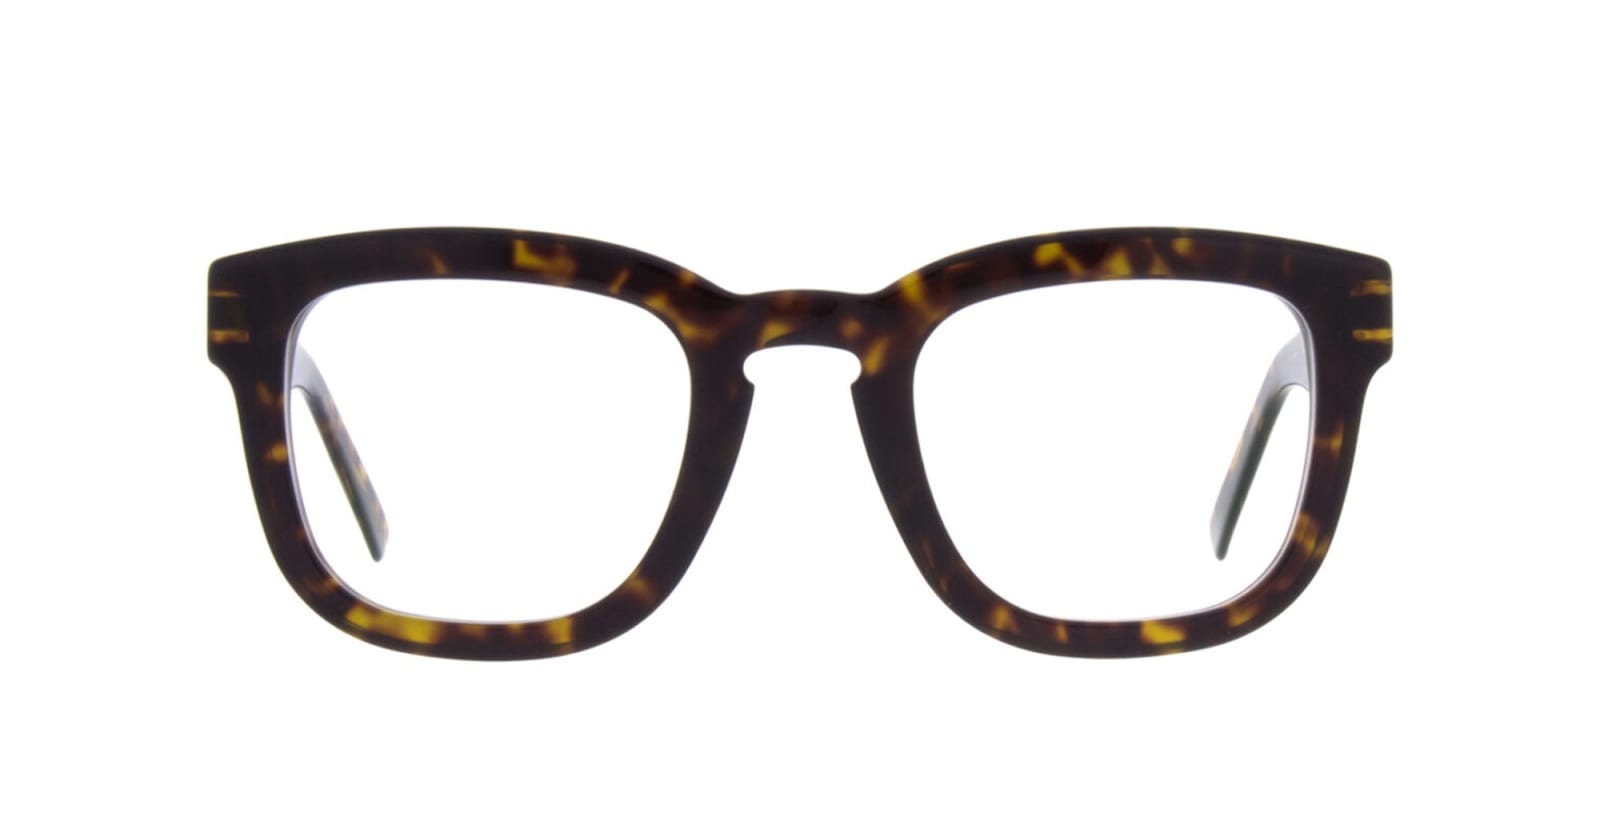 Andy Wolf Aw01 - Brown / Gold Glasses